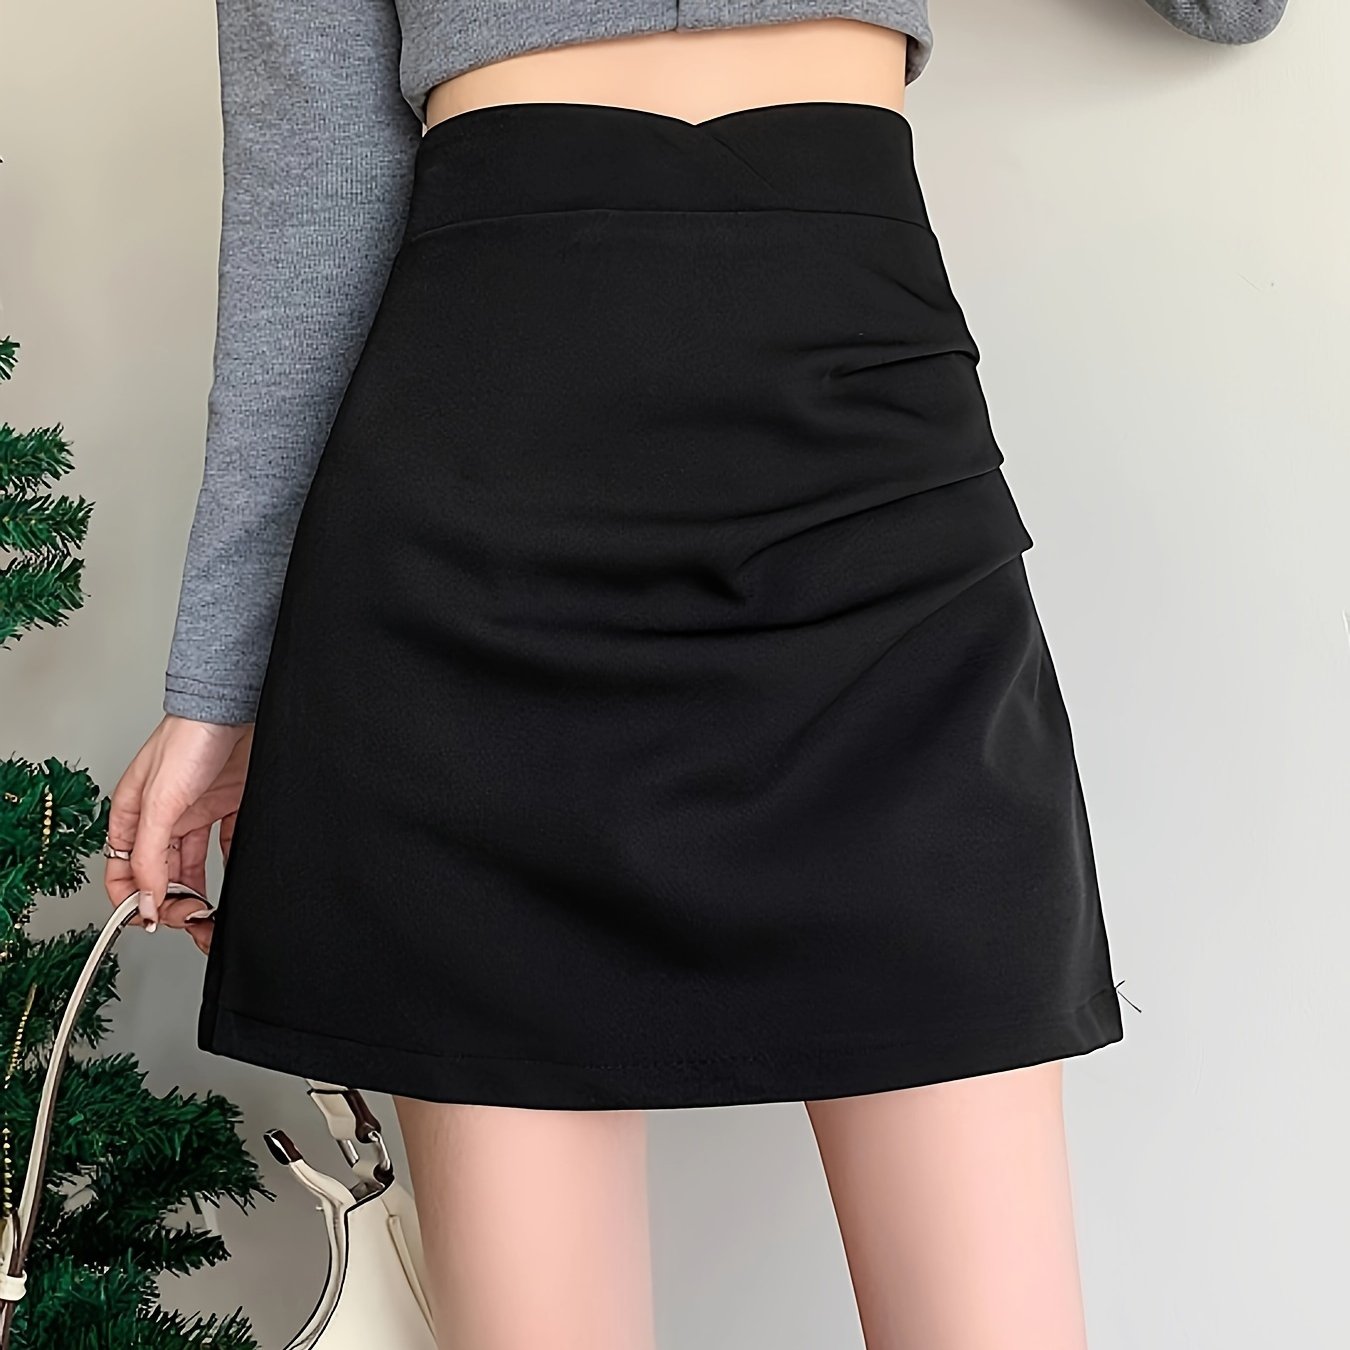 Antmvs Solid High Waist Ruched Skirt, Casual A Line Mini Skirt, Women's Clothing